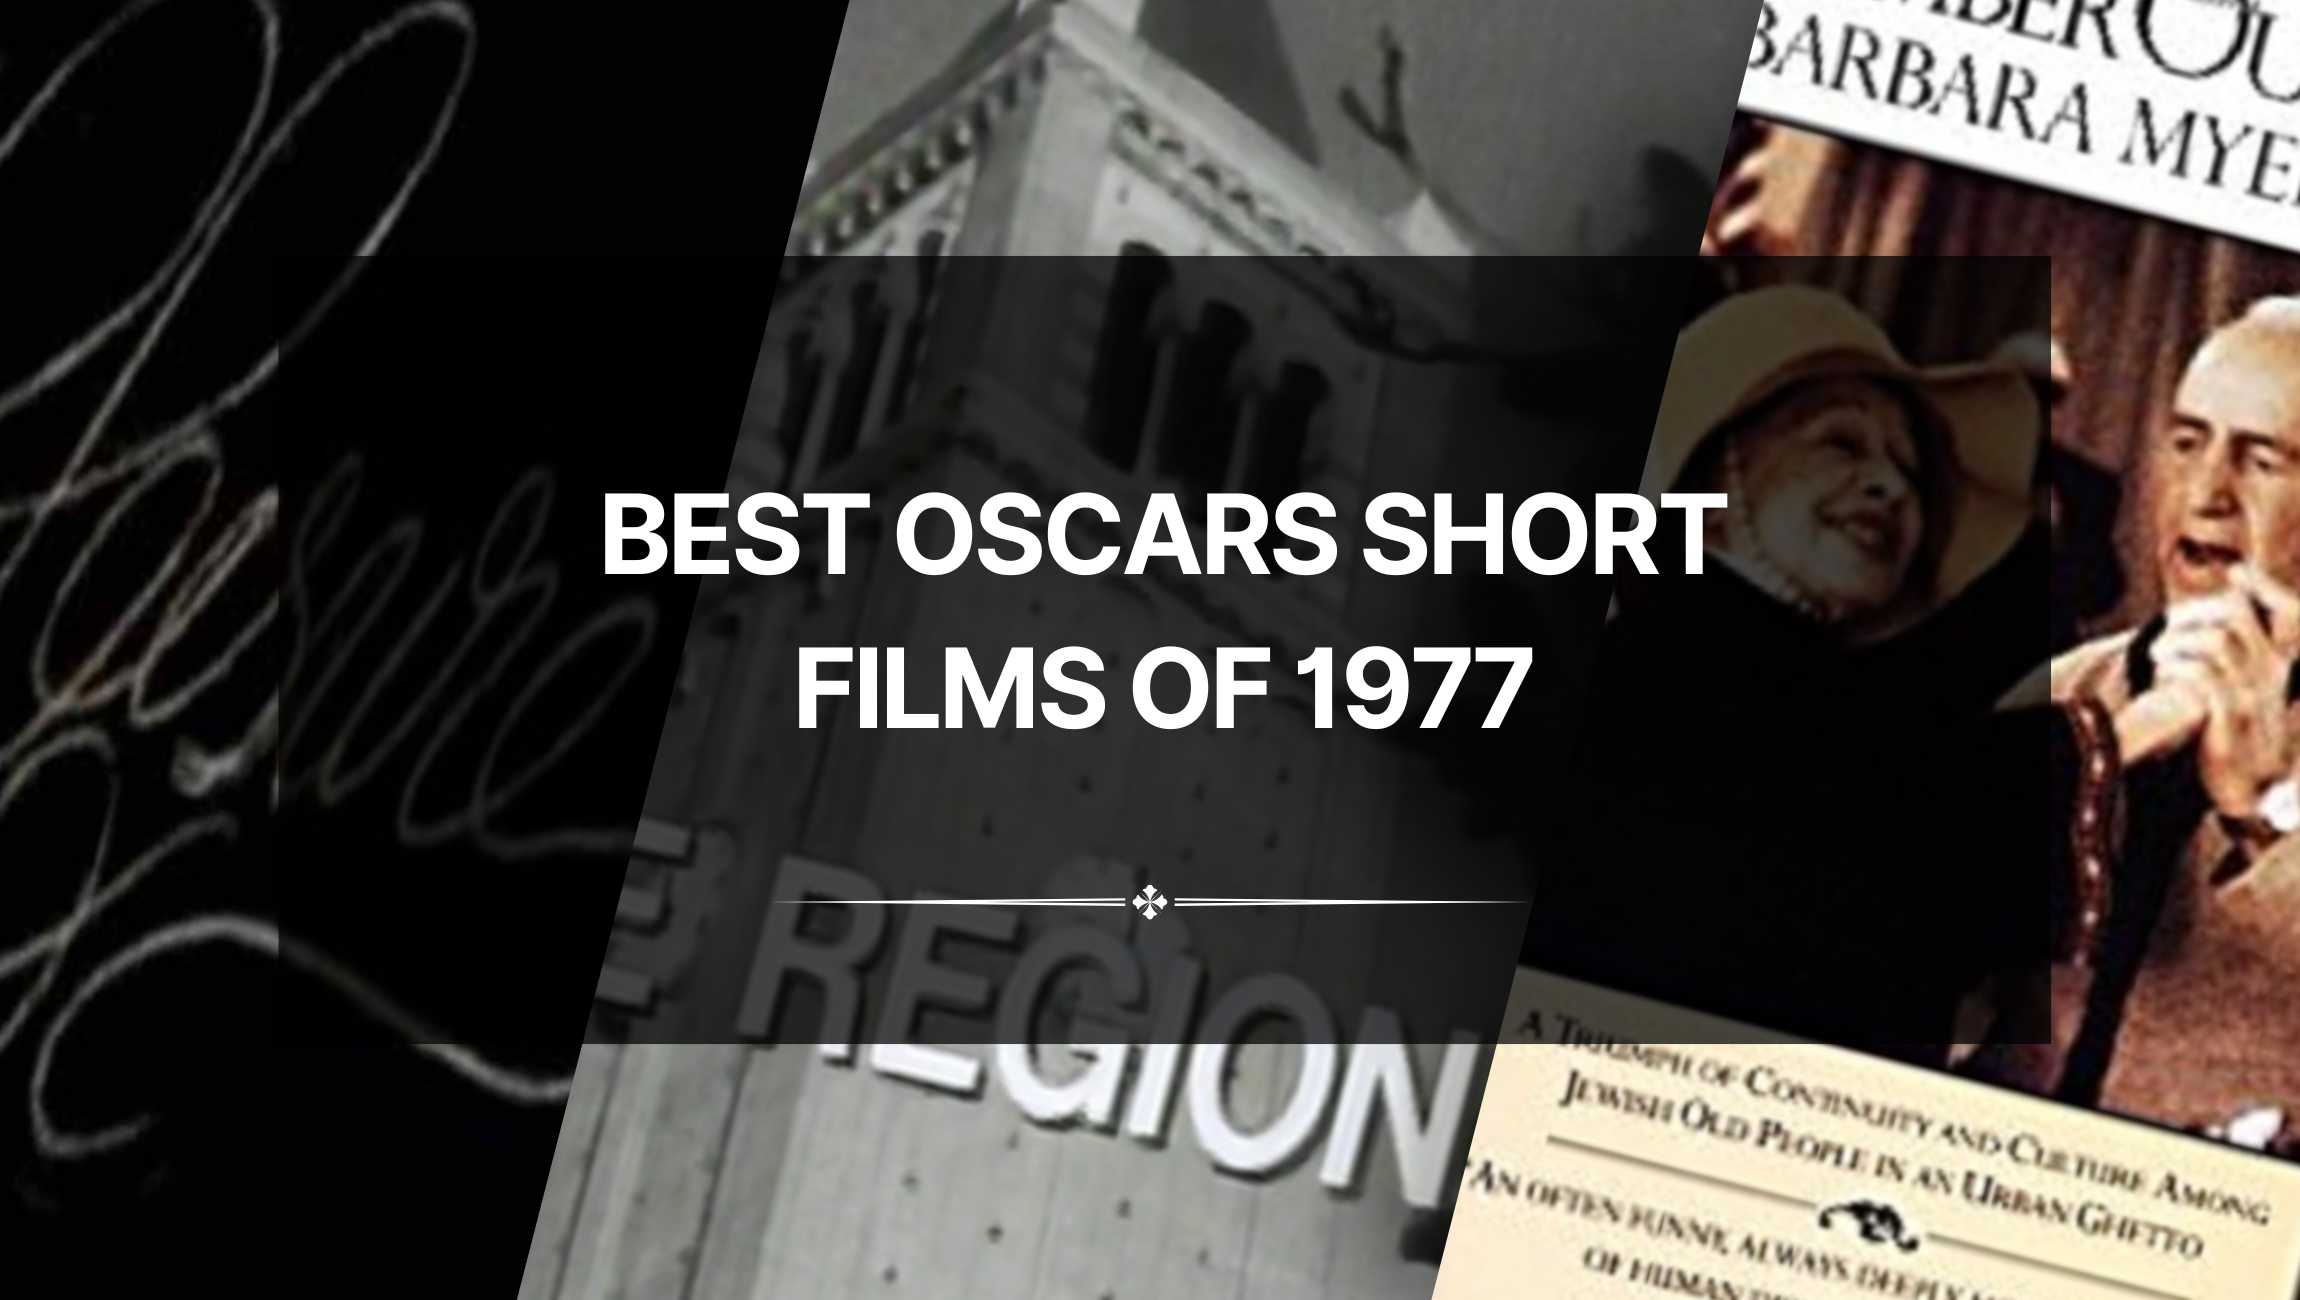 Best Oscars Short Films of 1977: Fascinating Cinematic Feats